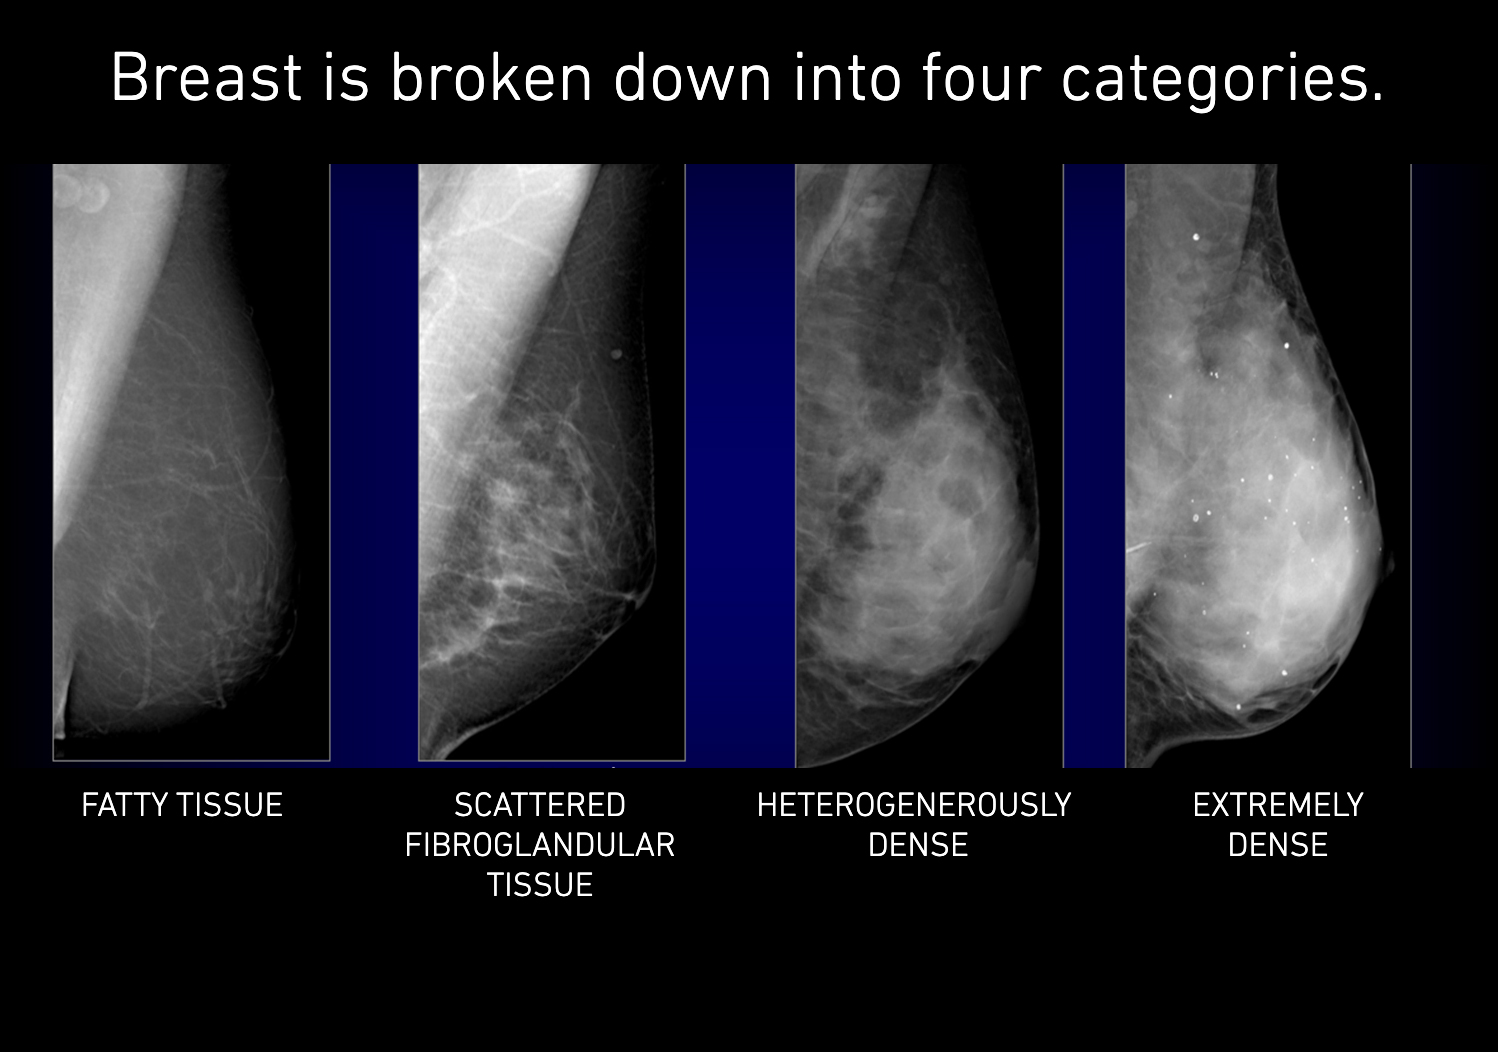 four categories of breast density